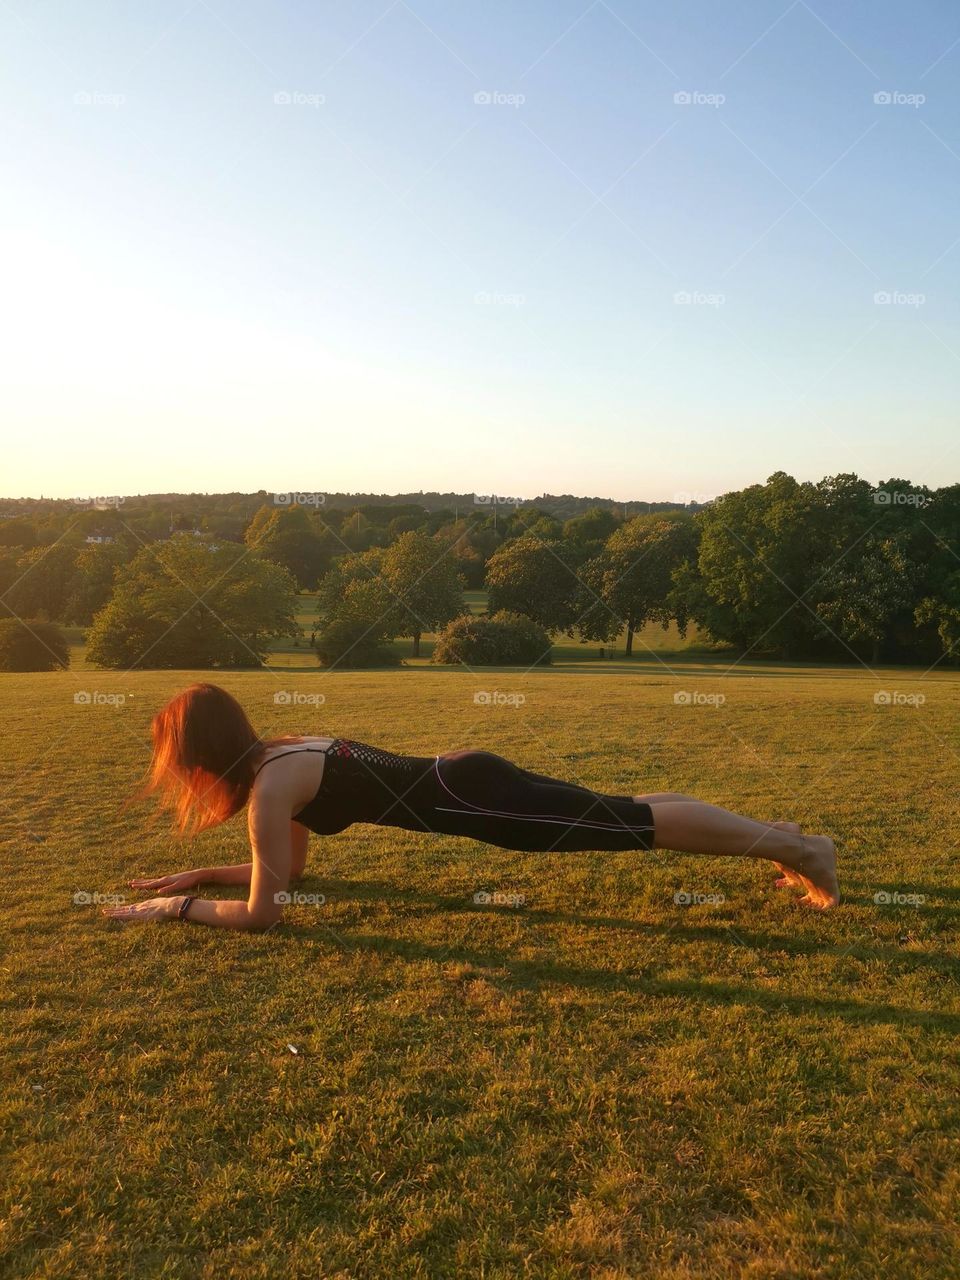 Yoga time in the park. Women does yoga. Sports lifestyle. Exercise "plank". Red colour hair. Healthy lifestyle. 
Unusual shooting angle. Shooting from below. Down up. From the ground up...